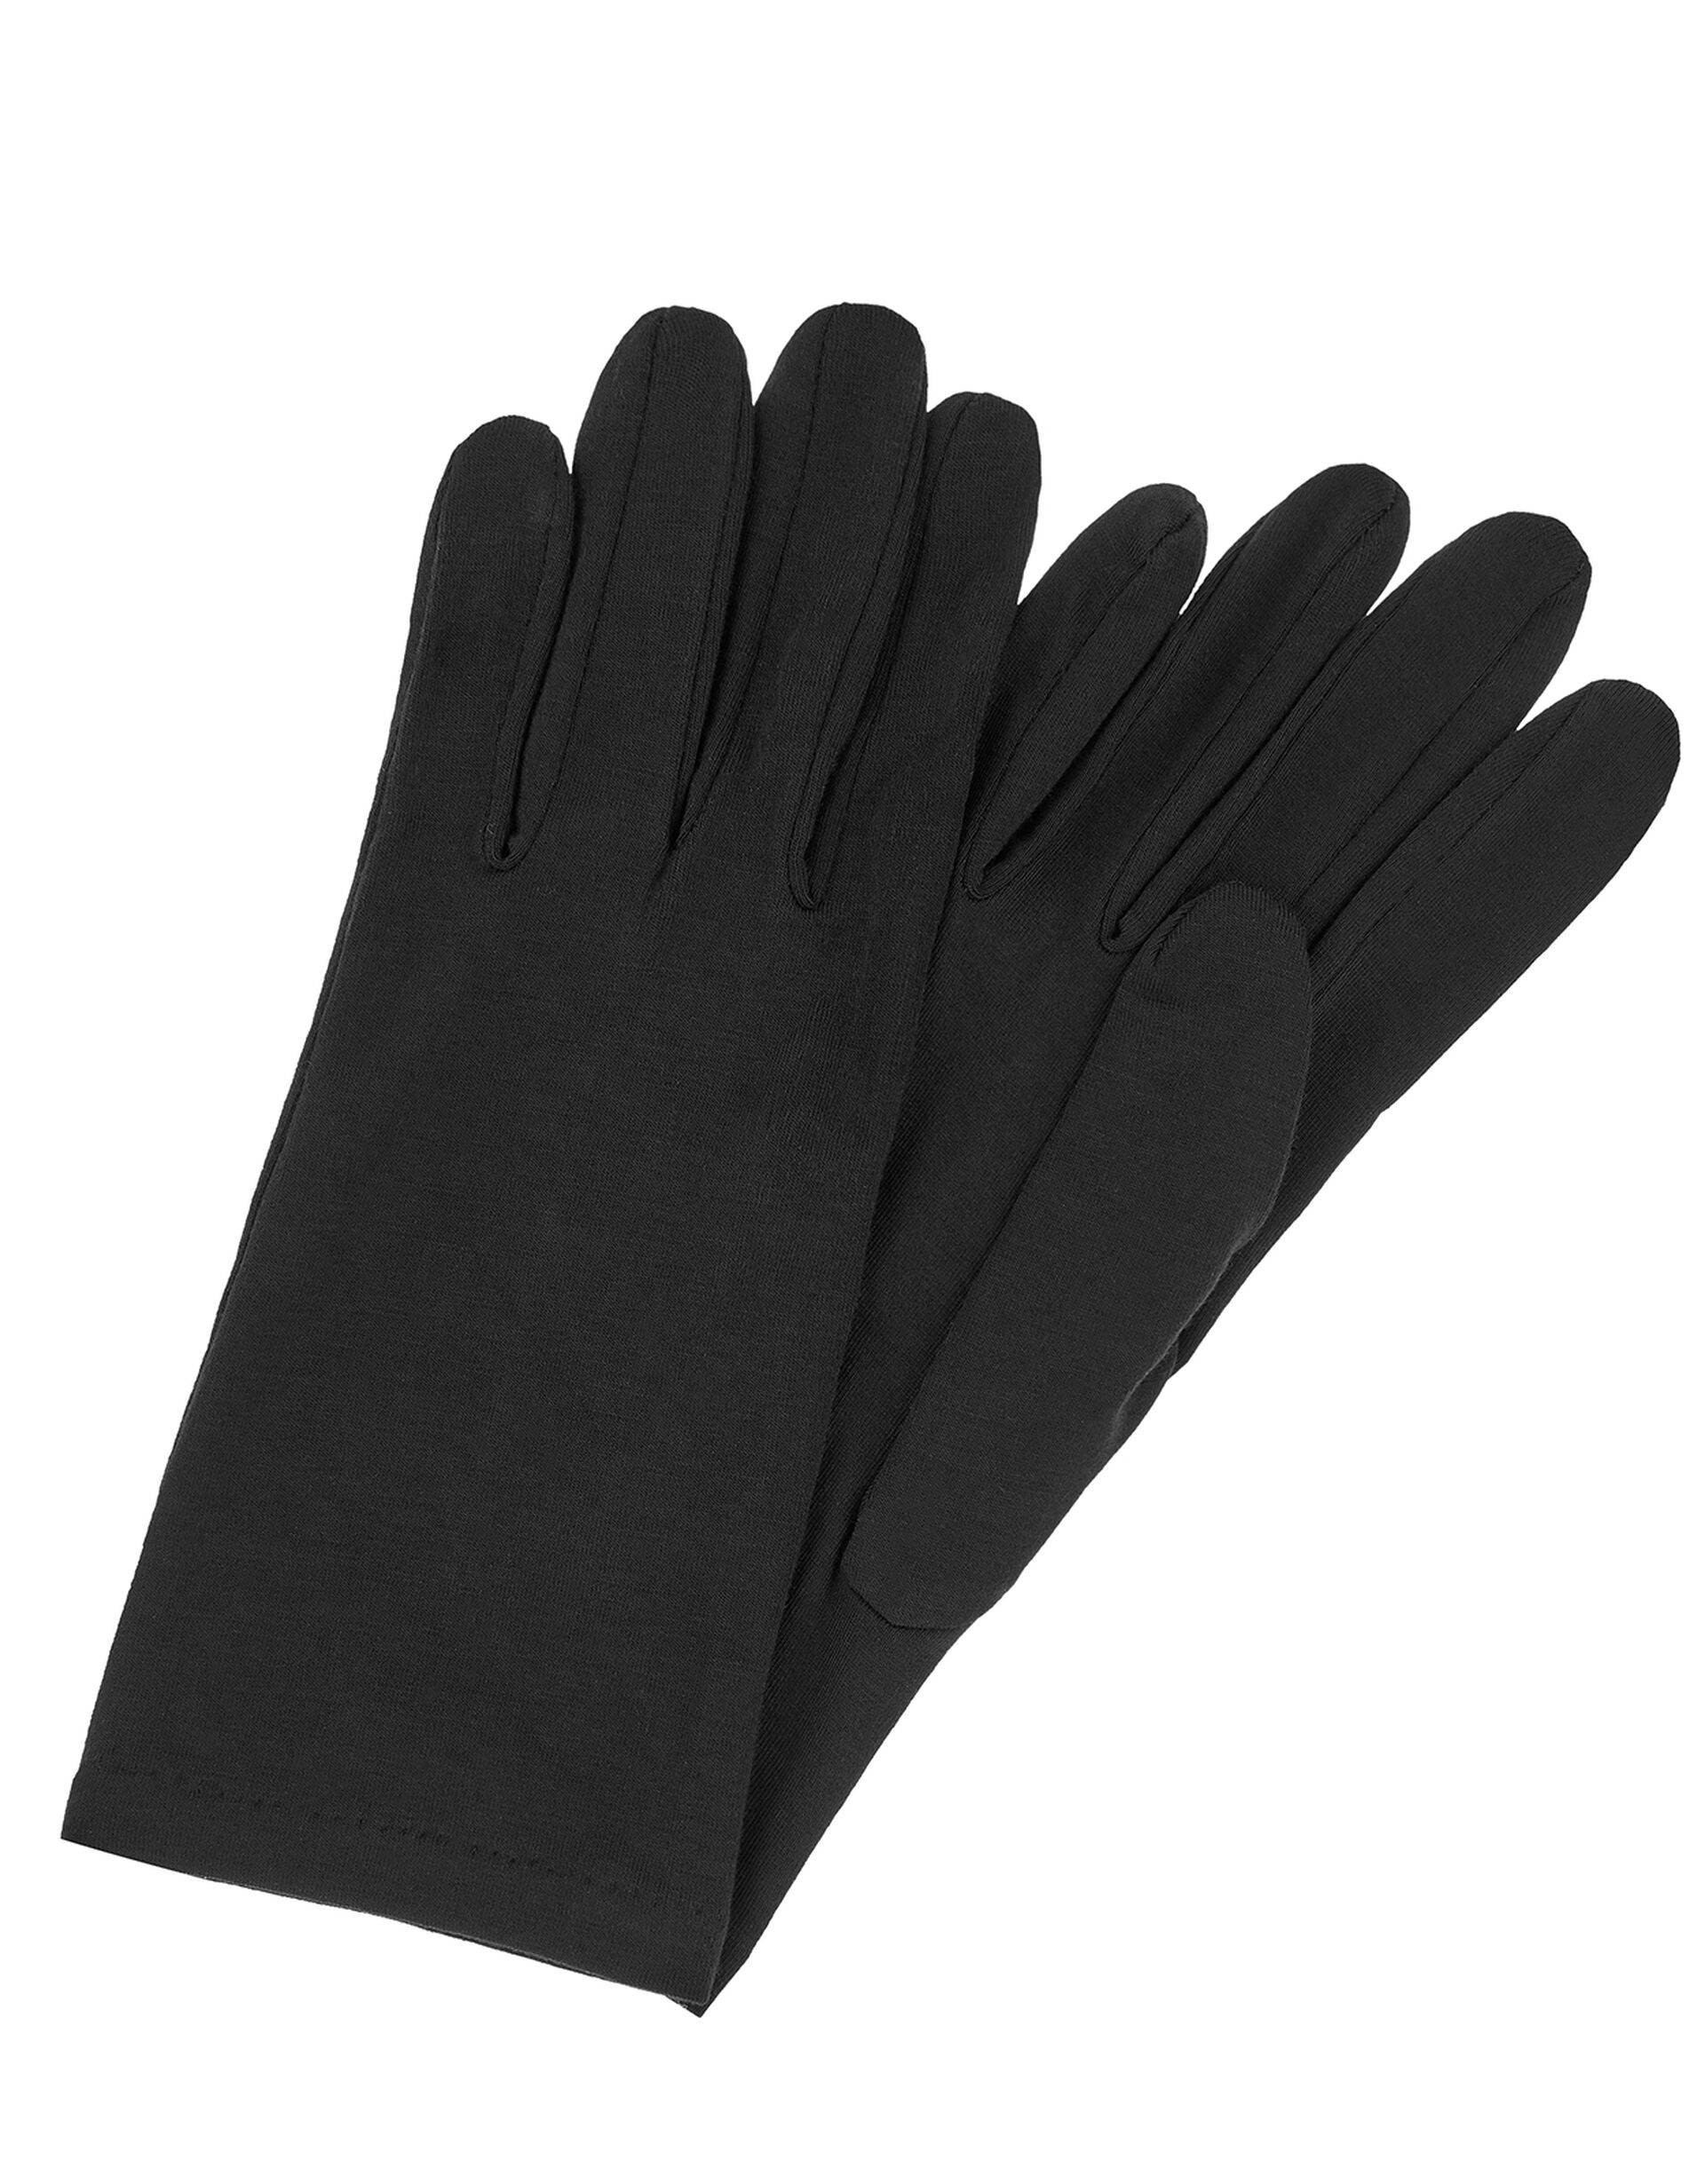 Bamboo Jersey Touch Screen Gloves, Black (BLACK), large